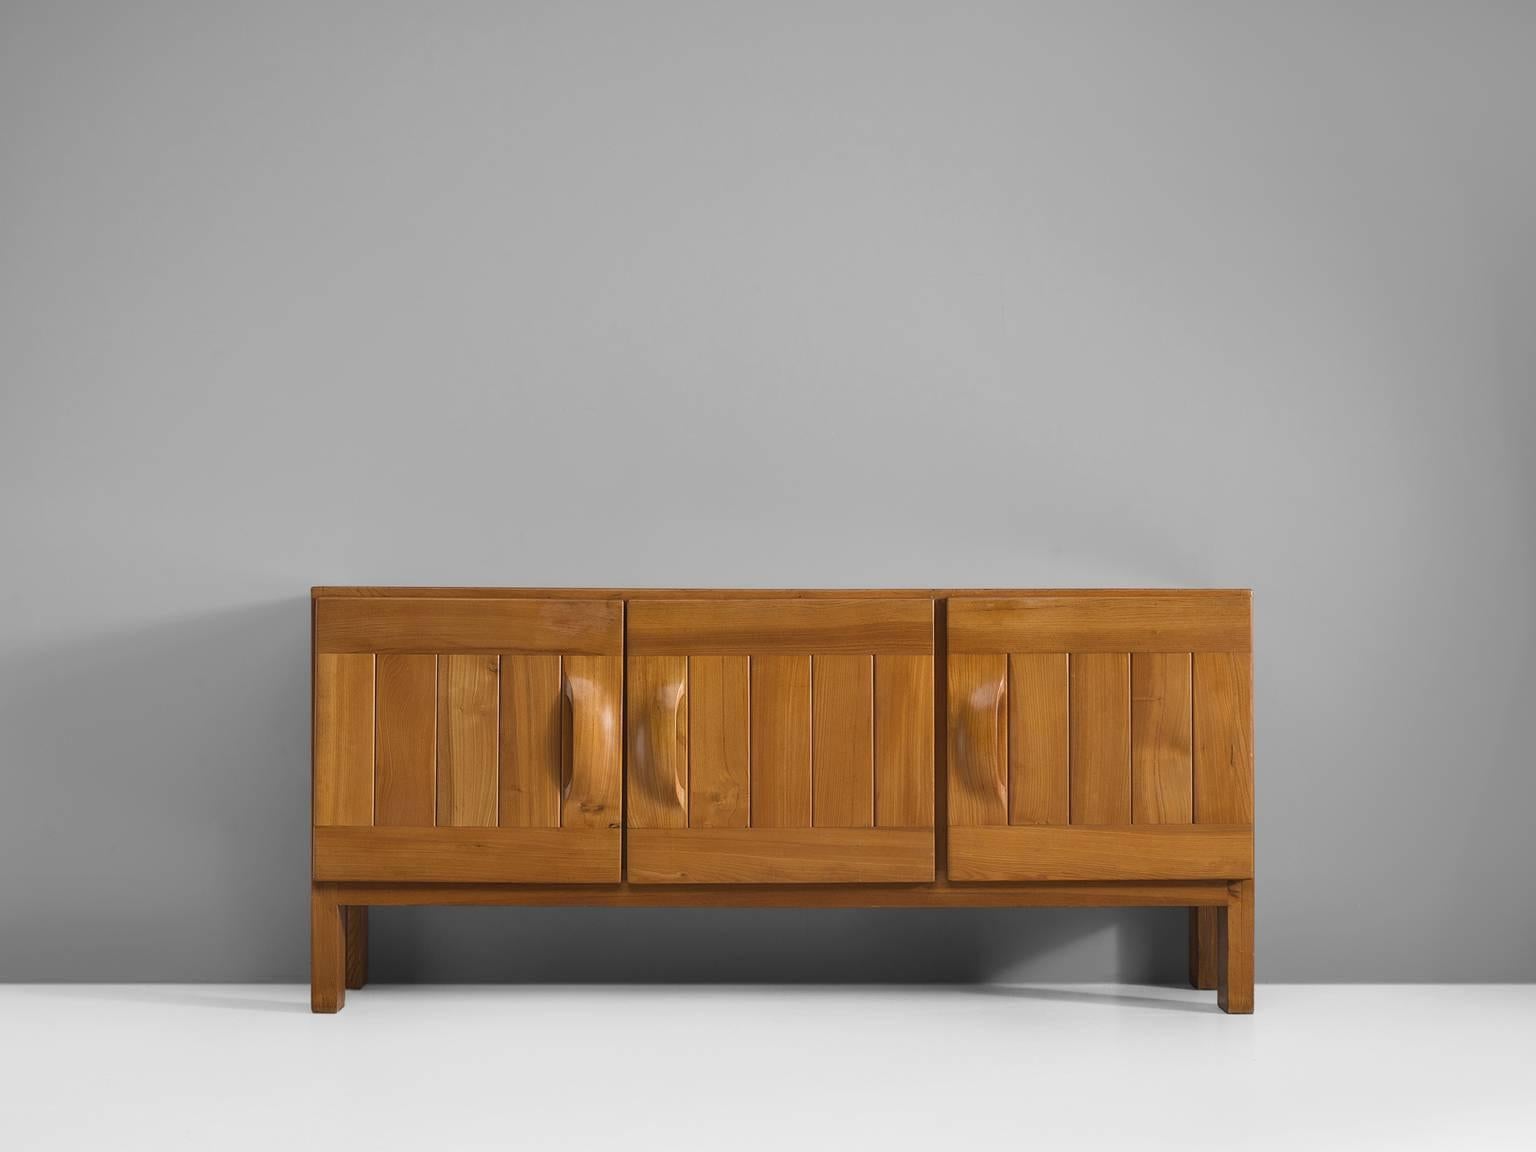 Credenza by Maison Regain, elm, France, 1960s.

This exquisite credenza combines a simplified yet complex design combined with nifty, solid construction details that characterize Maison Regain's designs. The three well balanced, sturdy doors are